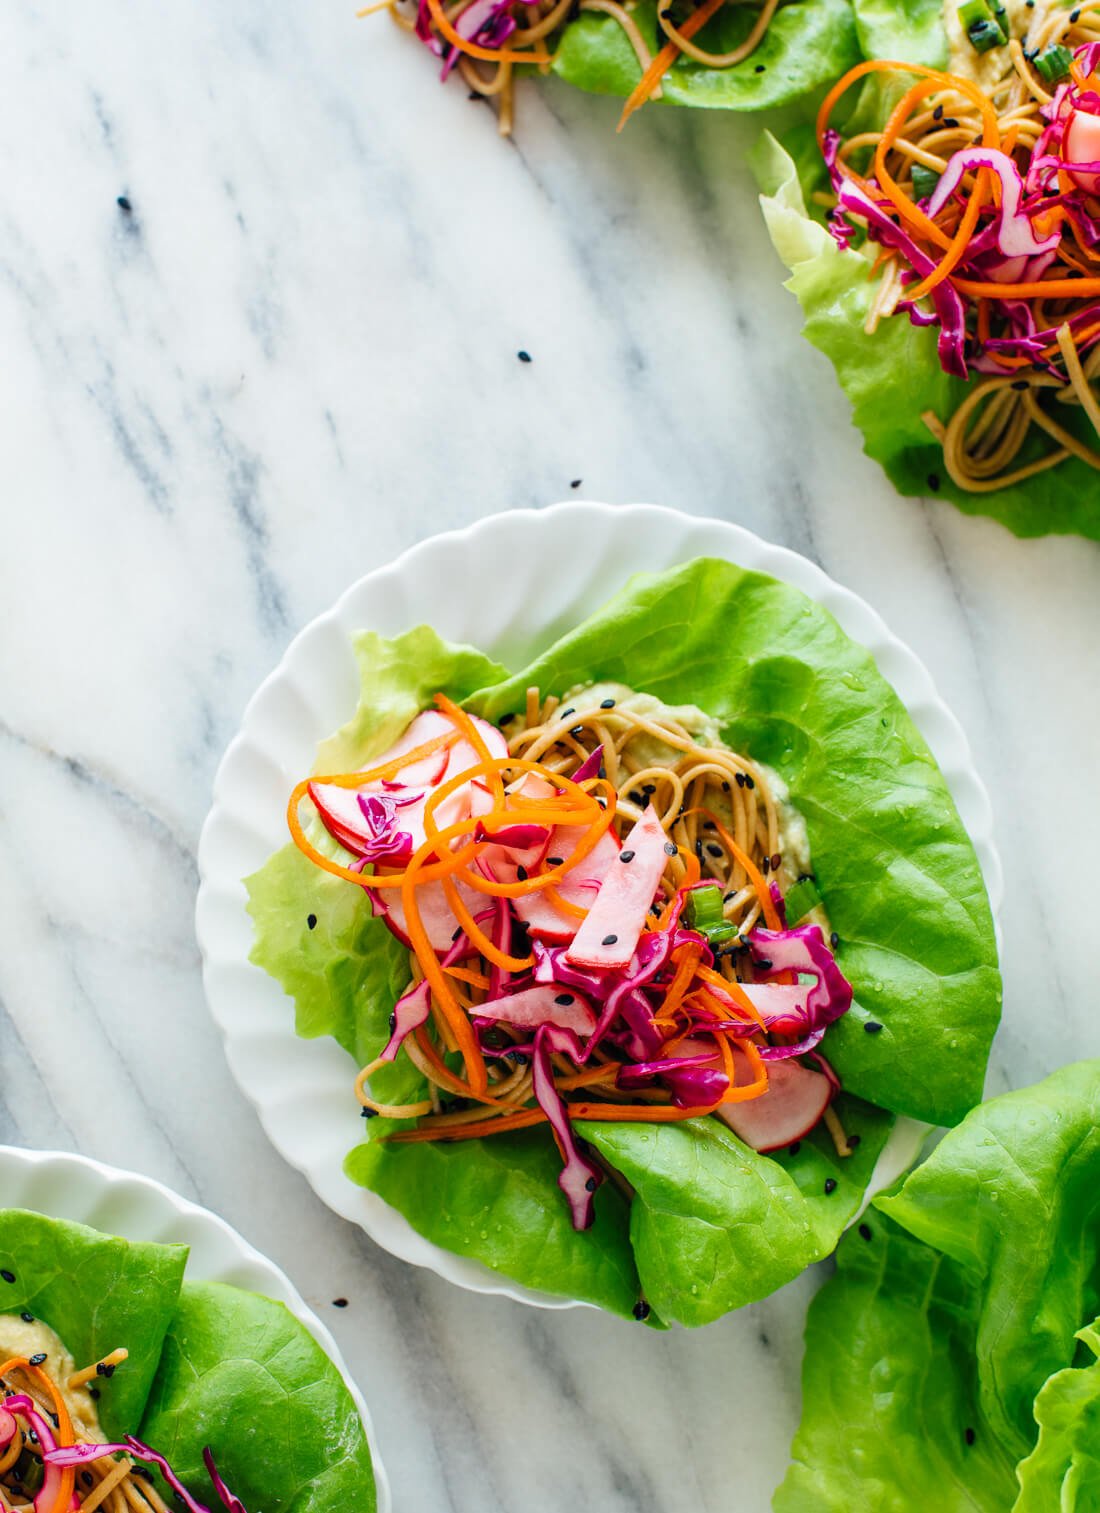 These healthy lettuce wraps are colorful, fun to eat, and so delicious! They're vegetarian/vegan, and easily gluten free. Get the recipe at cookieandkate.com